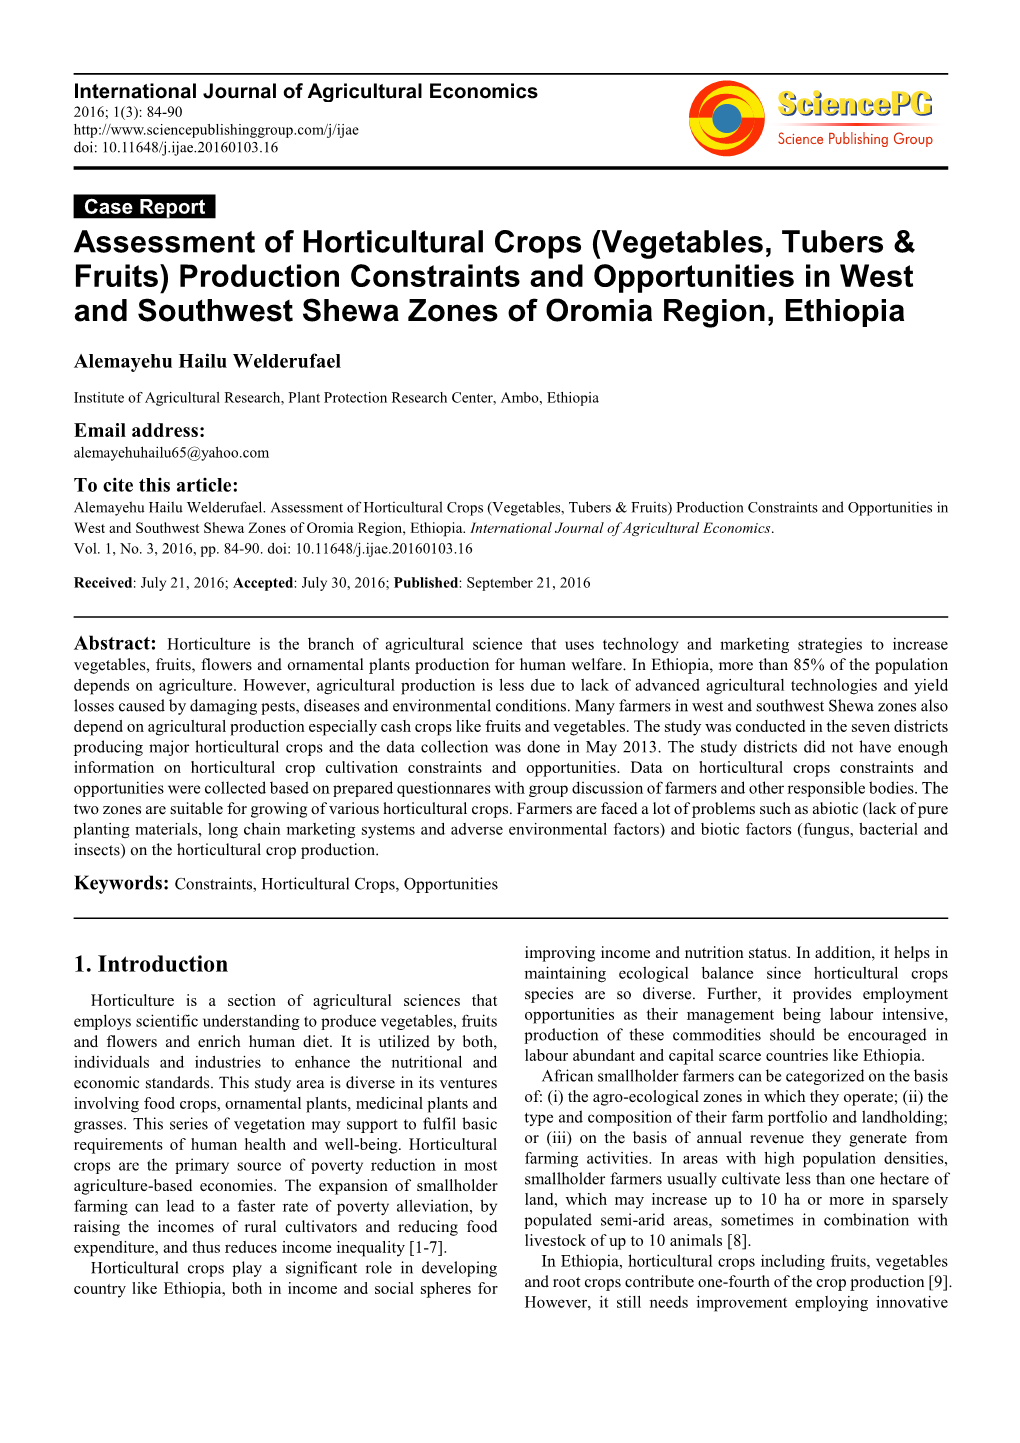 Assessment of Horticultural Crops (Vegetables, Tubers & Fruits) Production Constraints and Opportunities in West and Southwest Shewa Zones of Oromia Region, Ethiopia